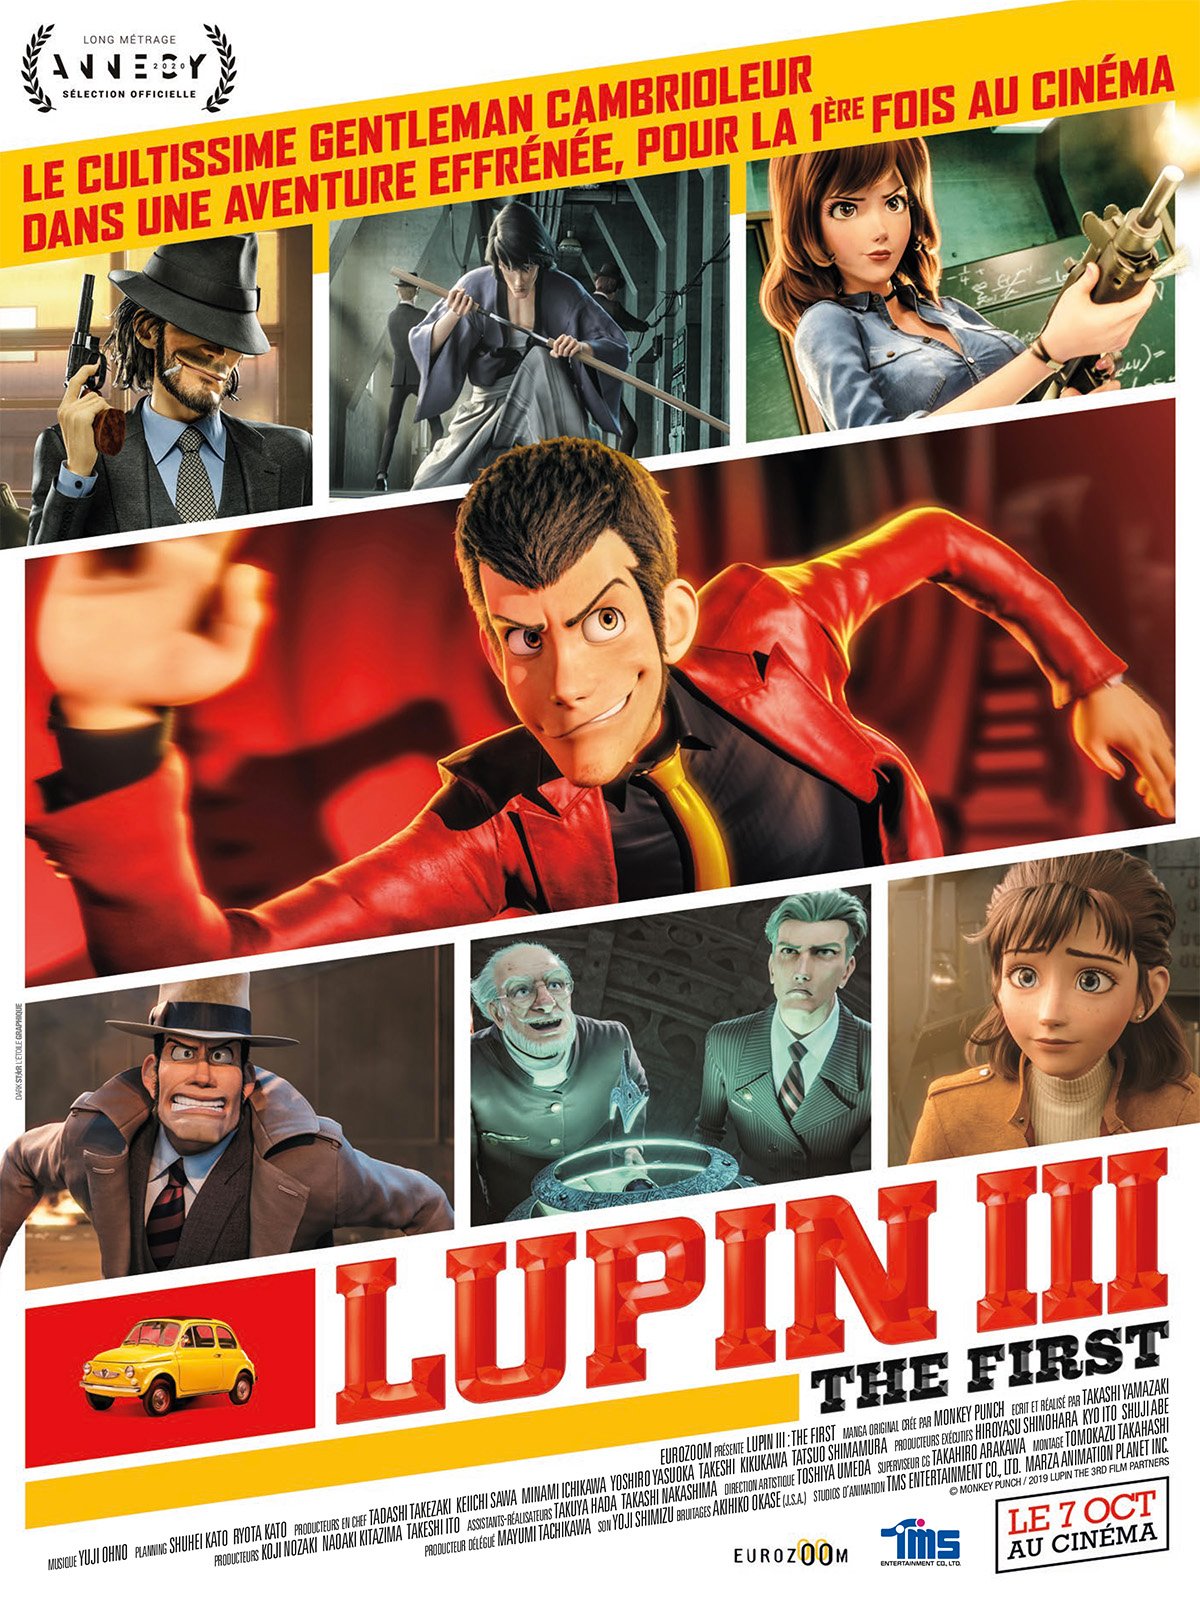 Lupin III: The First en Blu Ray : Lupin III : The First - AlloCiné